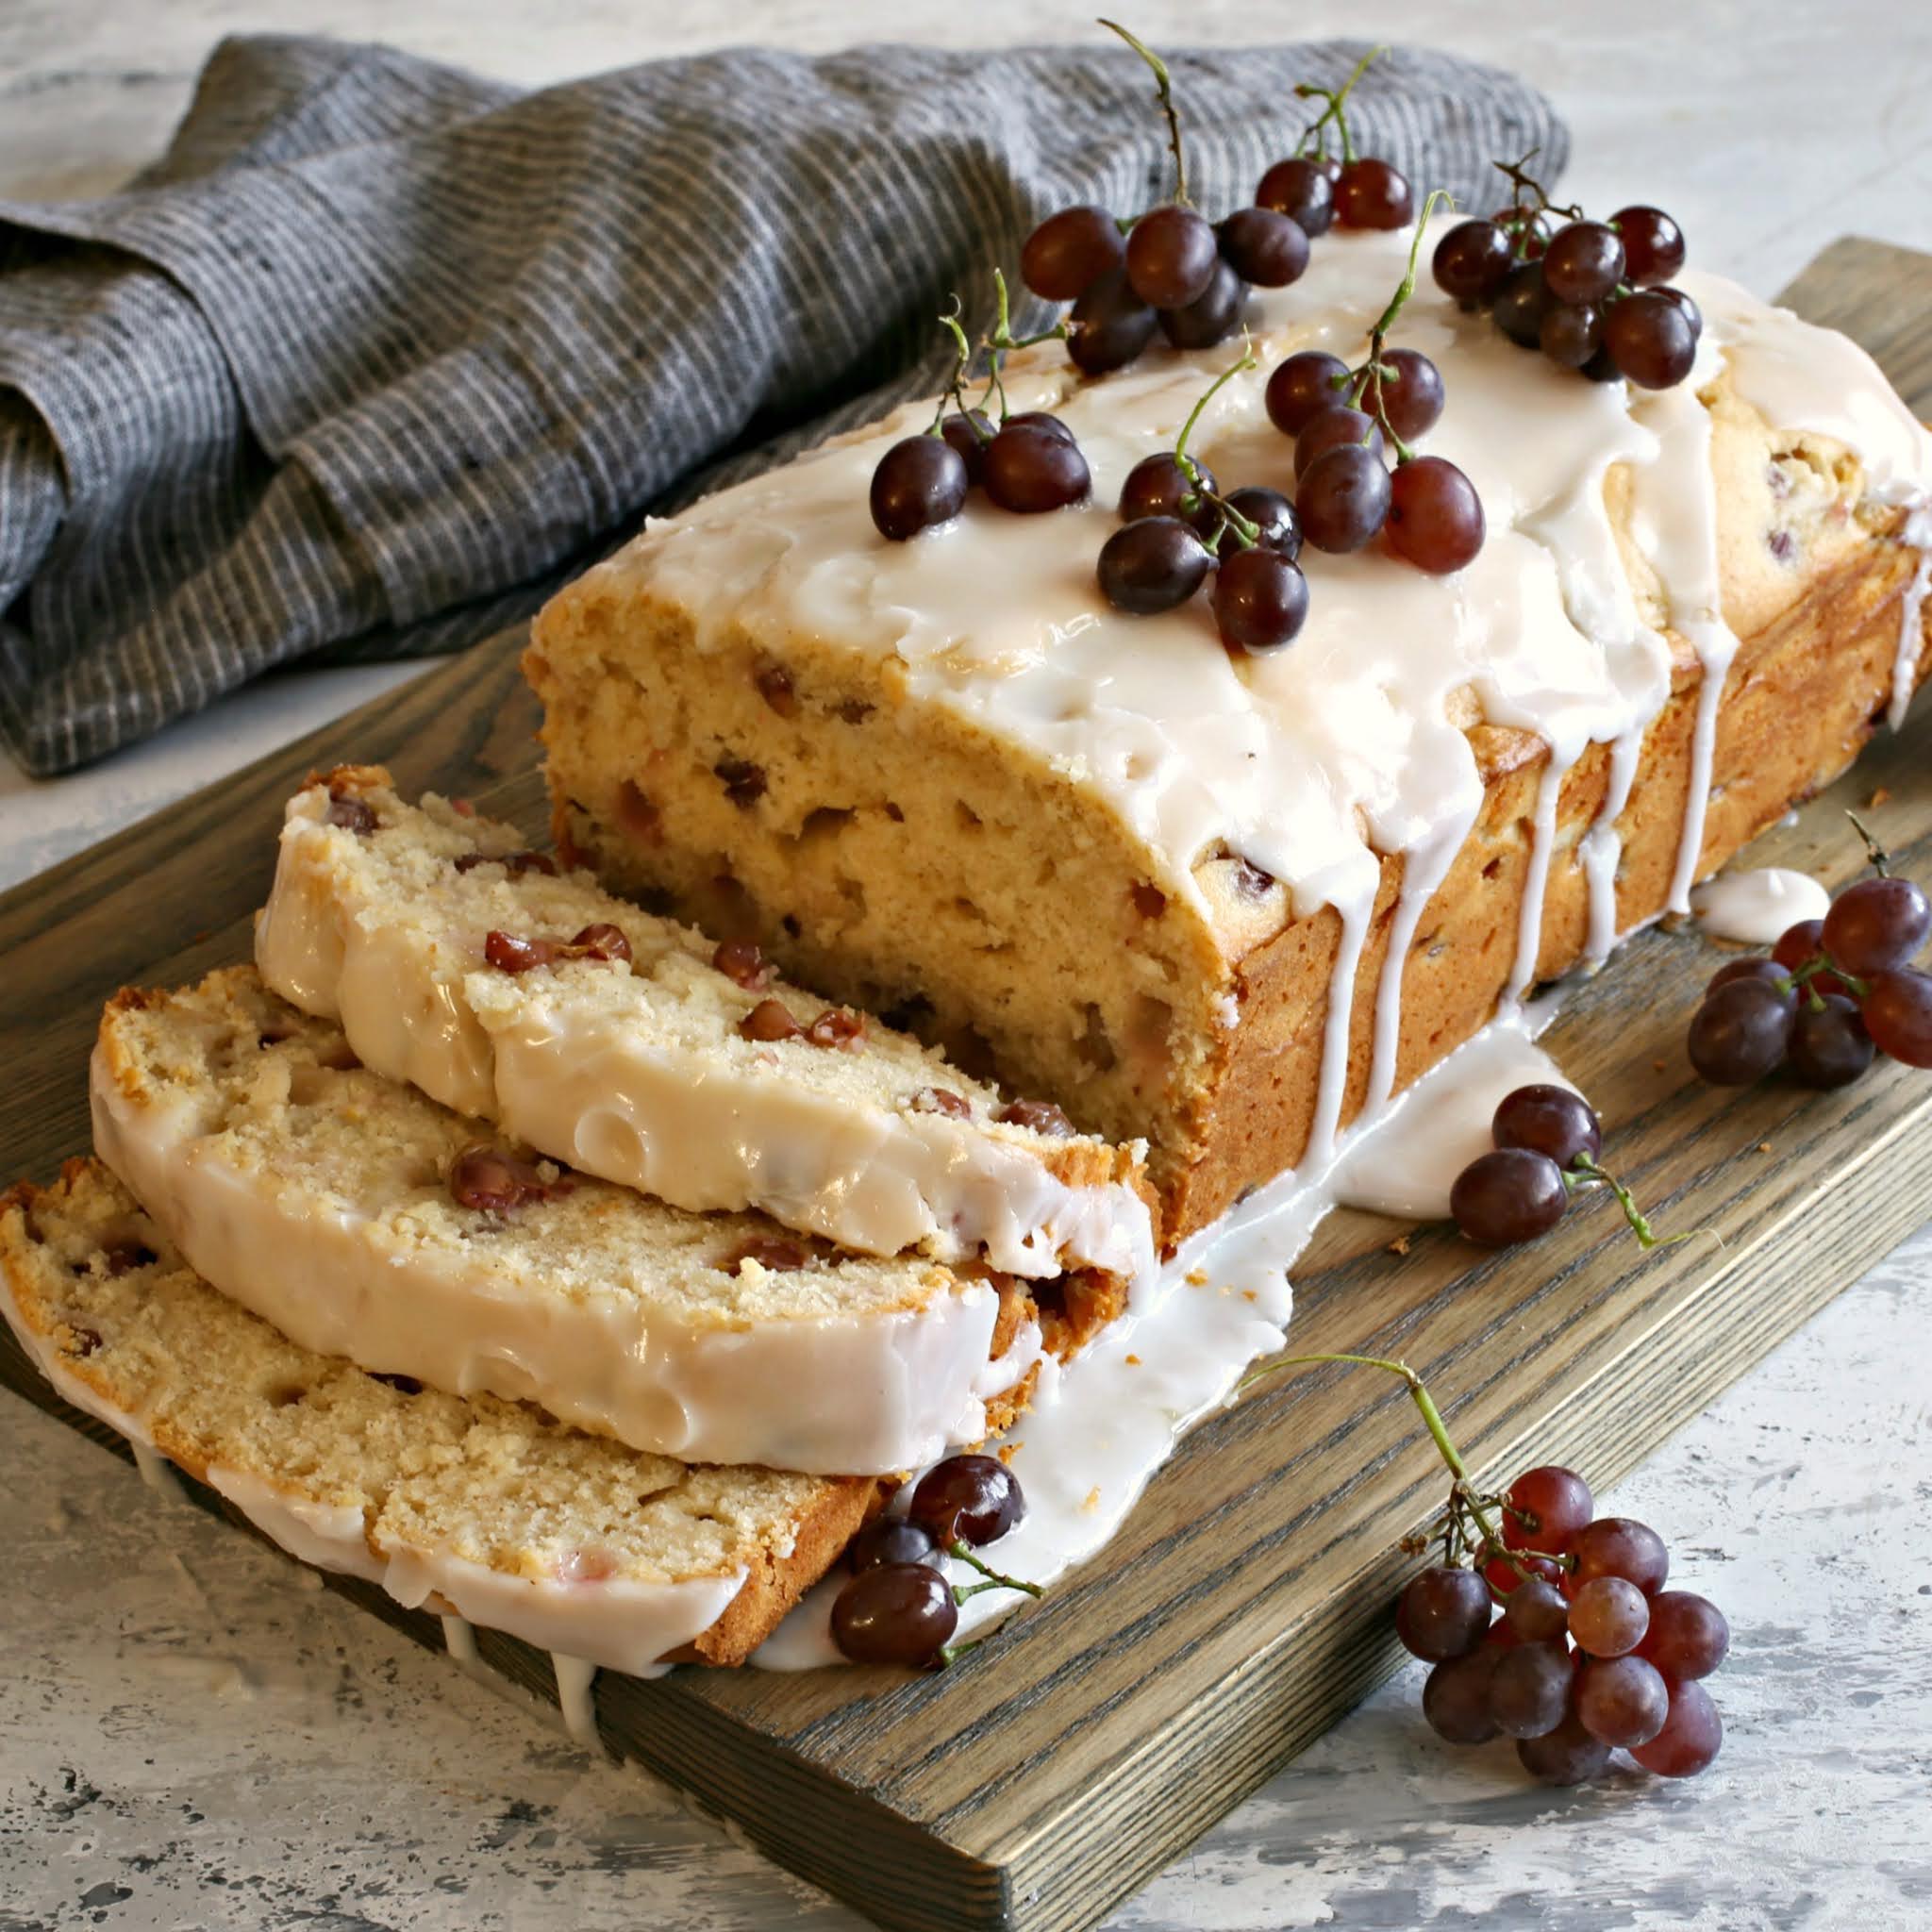 Recipe for a loaf cake baked with champagne grapes and topped with a lemon glaze.